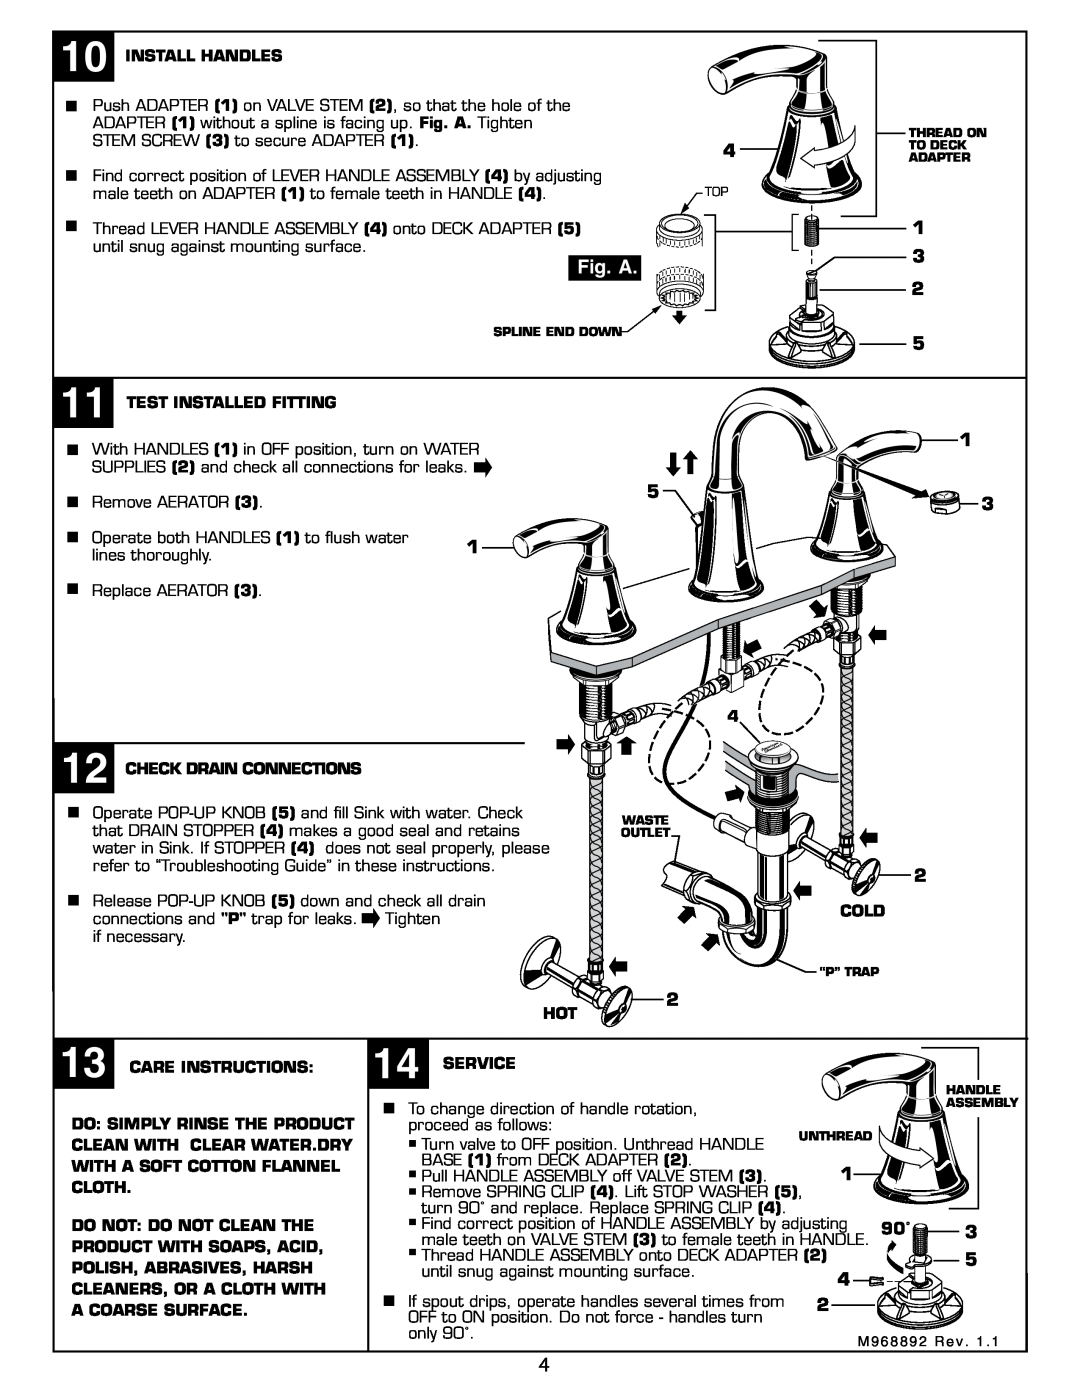 American Standard 7038.801 installation instructions Fig. A 